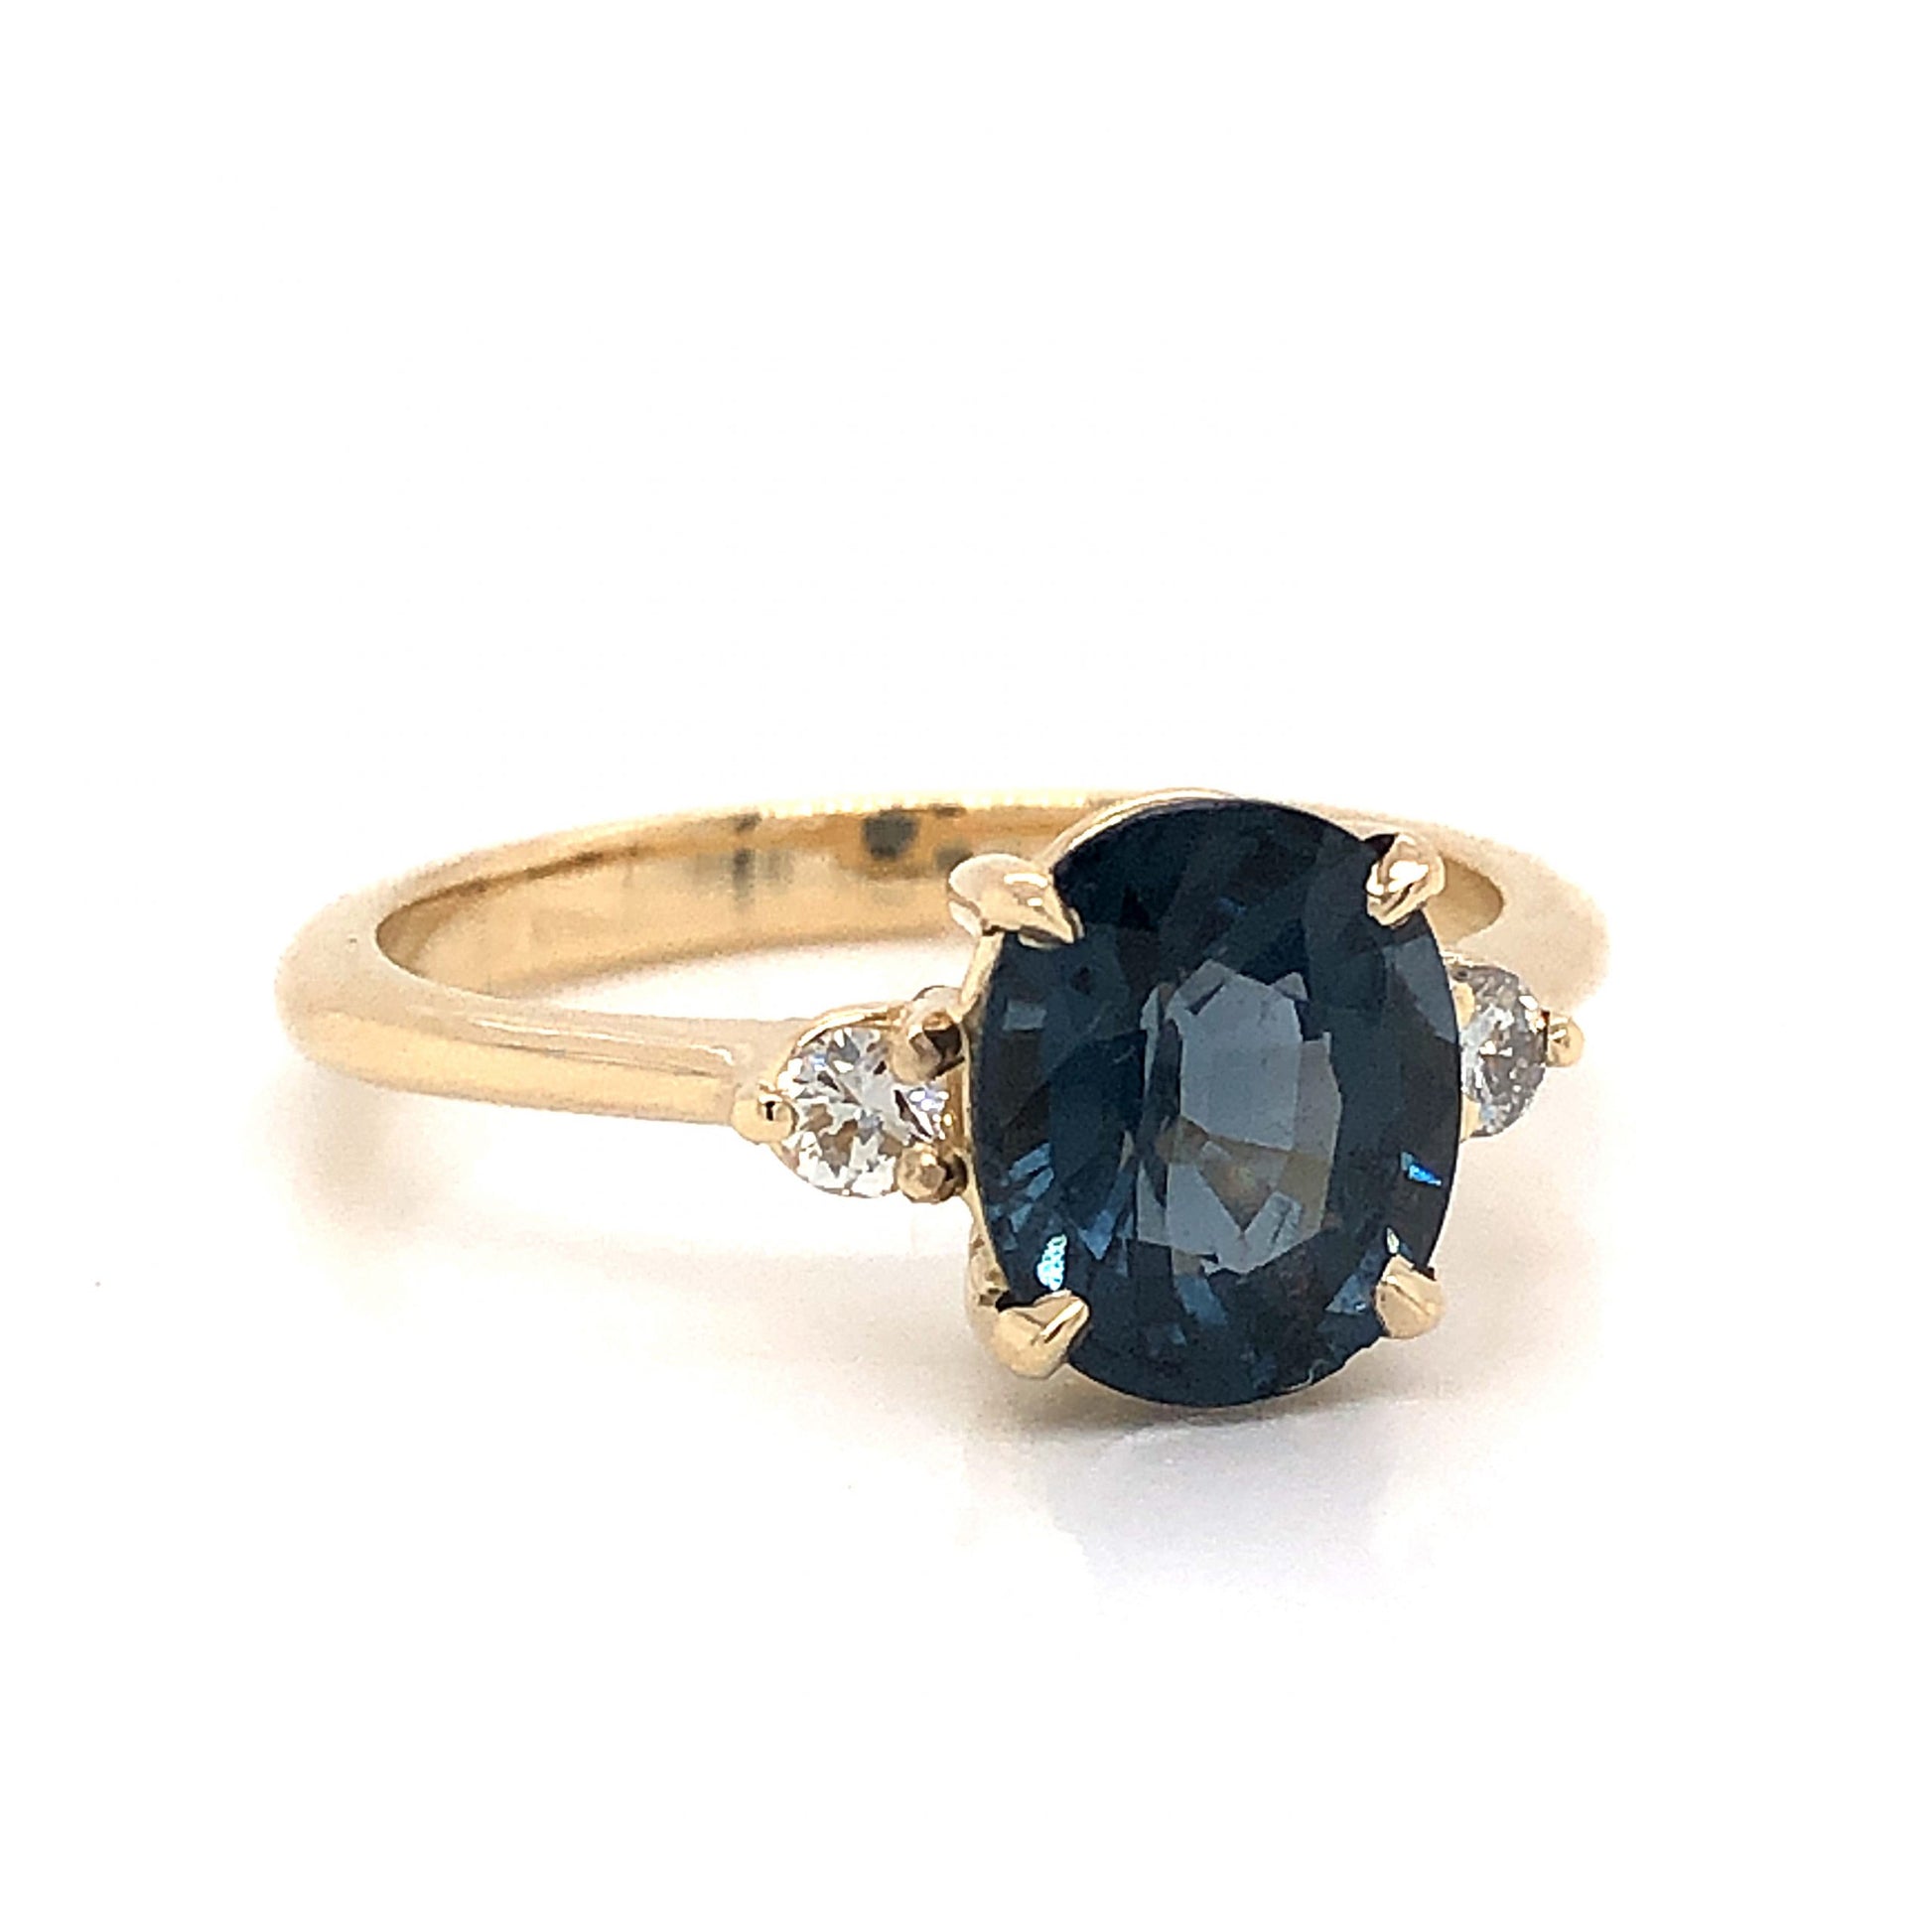 2.33 Oval Cut Sapphire Engagement Ring in 14k Yellow GoldComposition: 14 Karat Yellow Gold Ring Size: 6.75 Total Diamond Weight: .10ct Total Gram Weight: 3.0 g Inscription: 14k
      